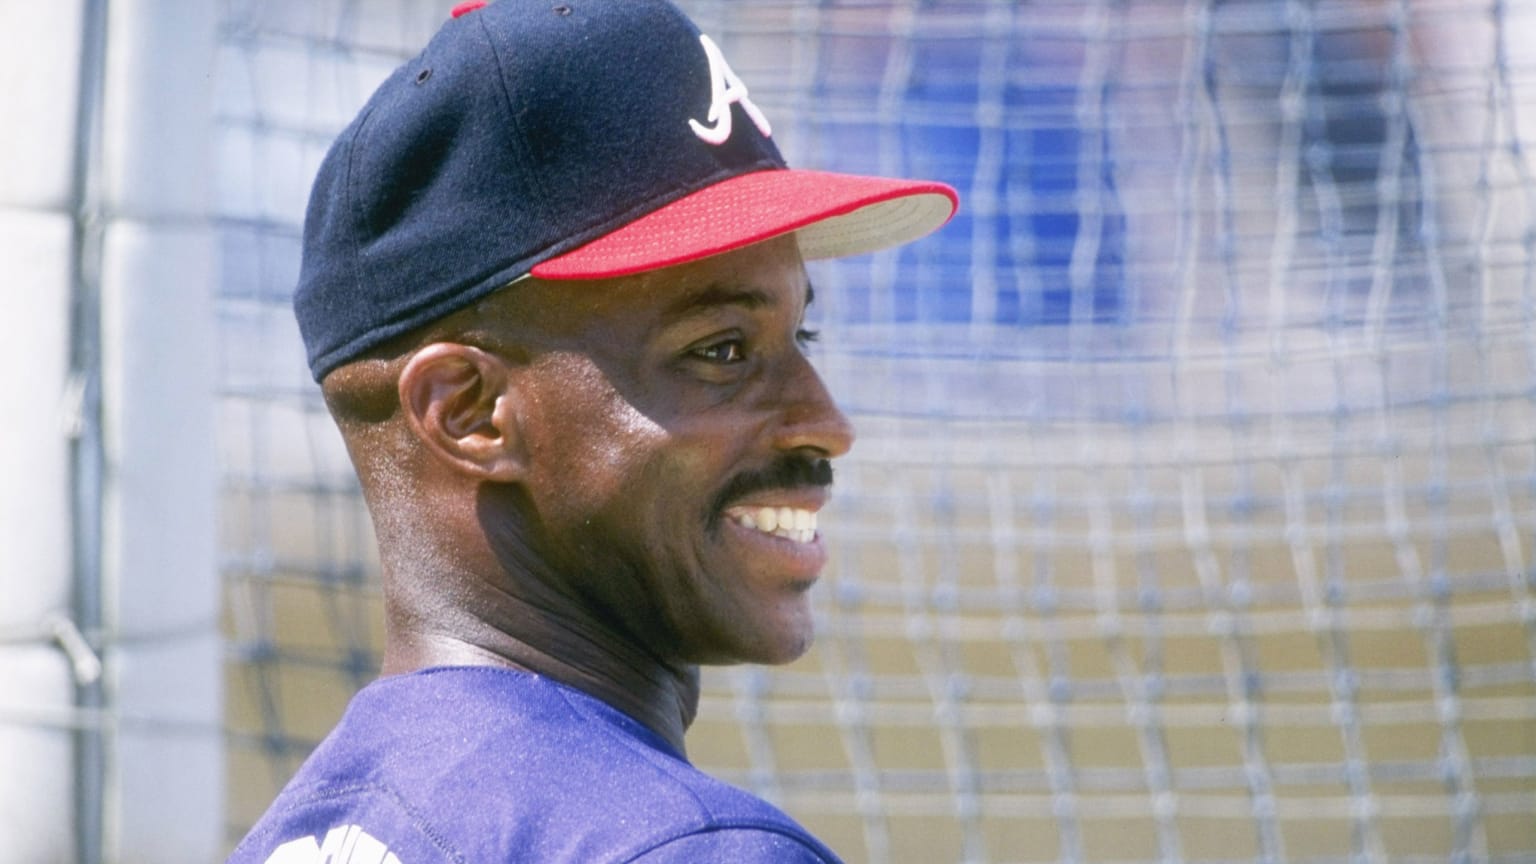 A smiling Fred McGriff stands near the batting cage